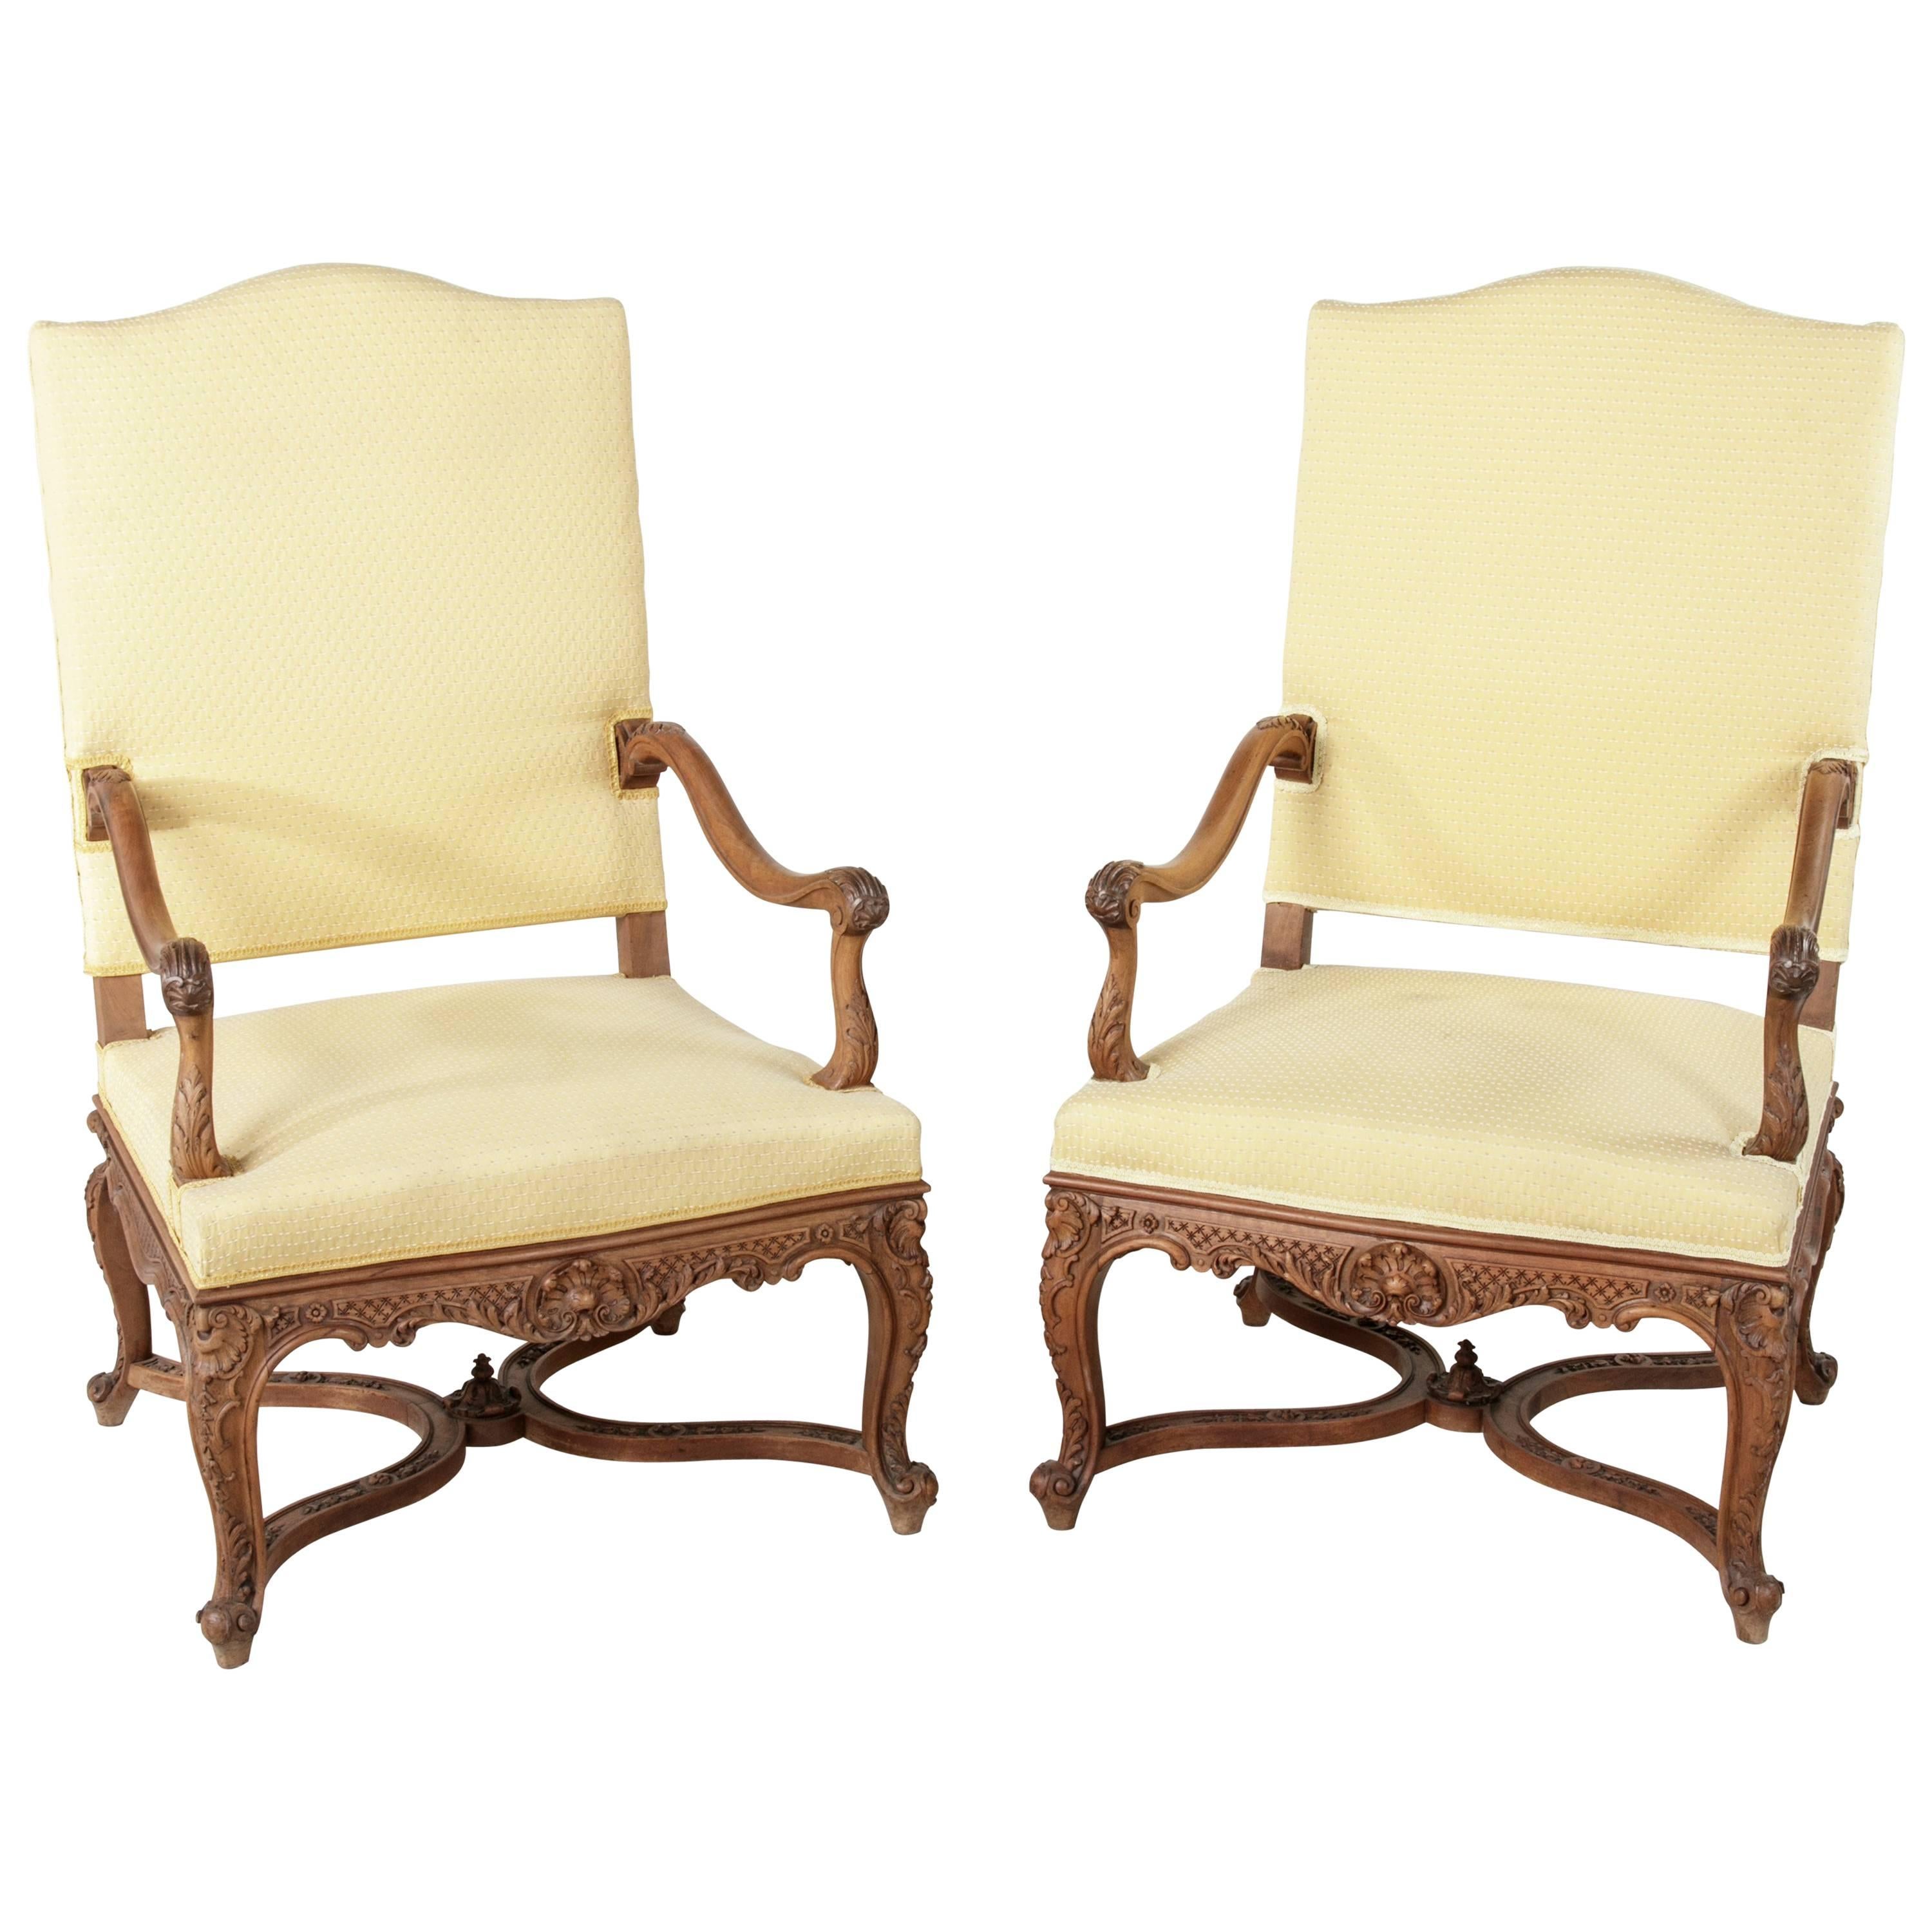 Pair of Late 19th Century Large-Scale French Regency Style Hand-Carved Armchairs